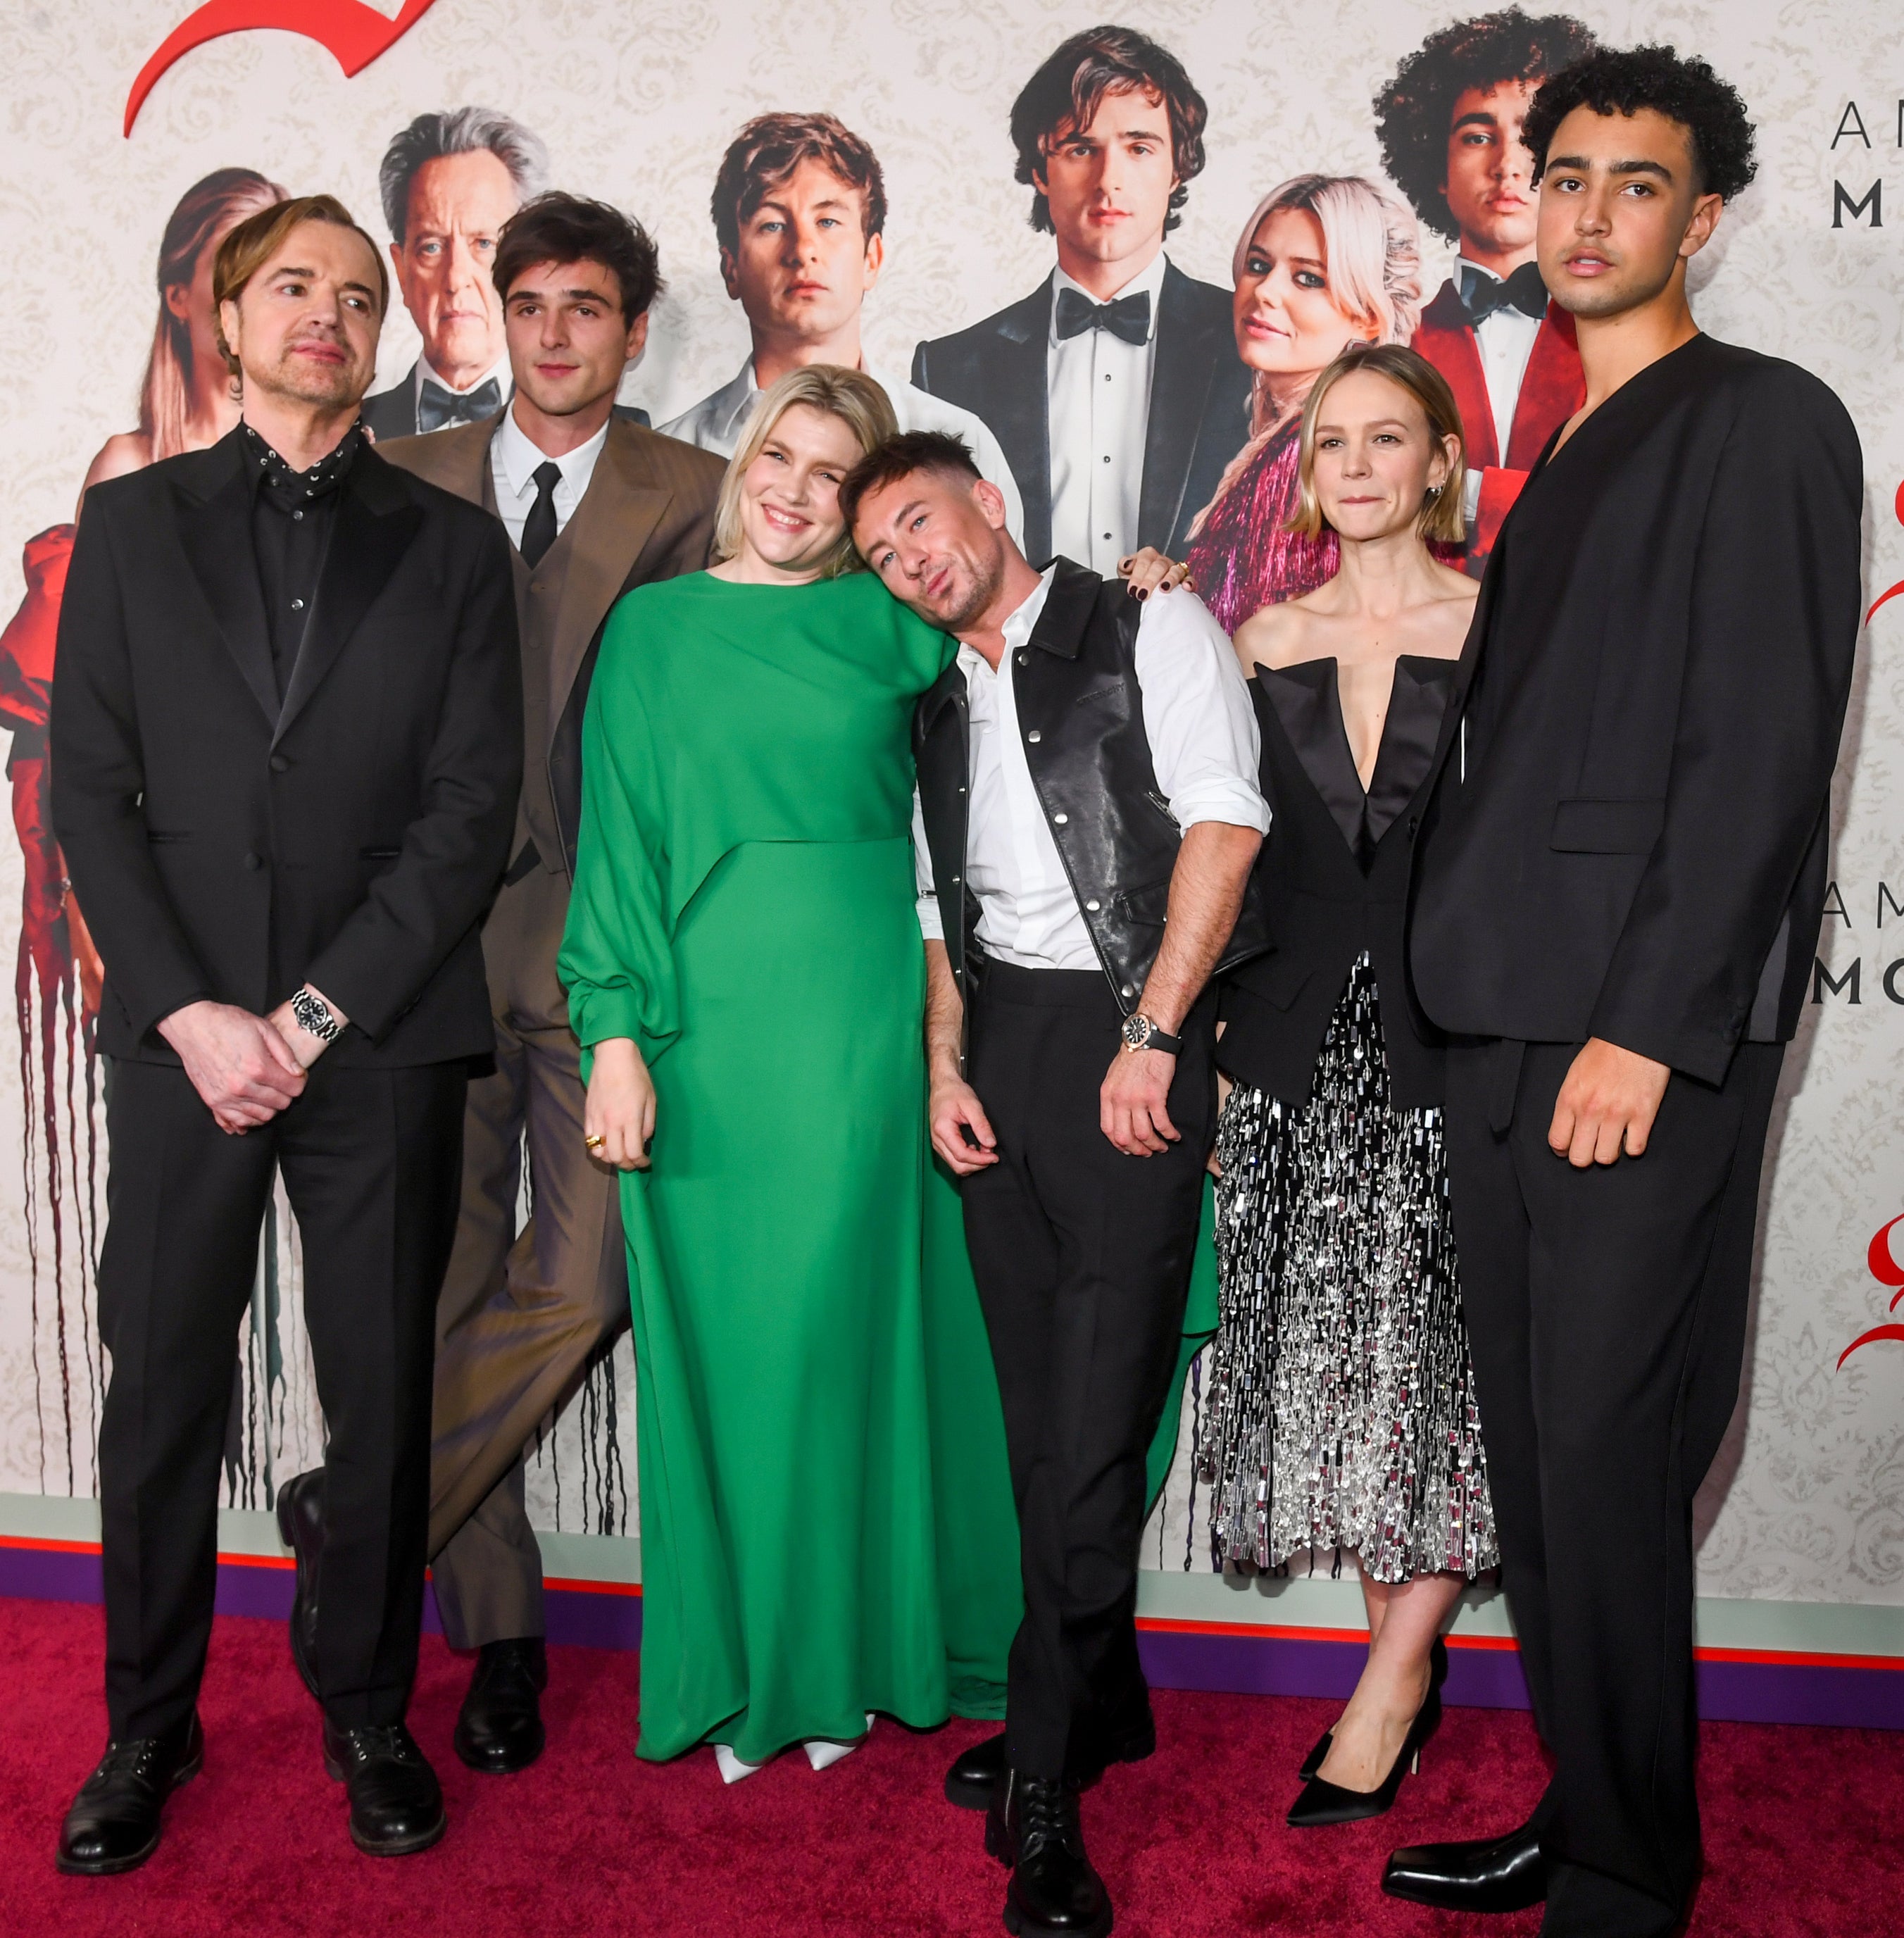 the cast on the red carpet for the movie premiere